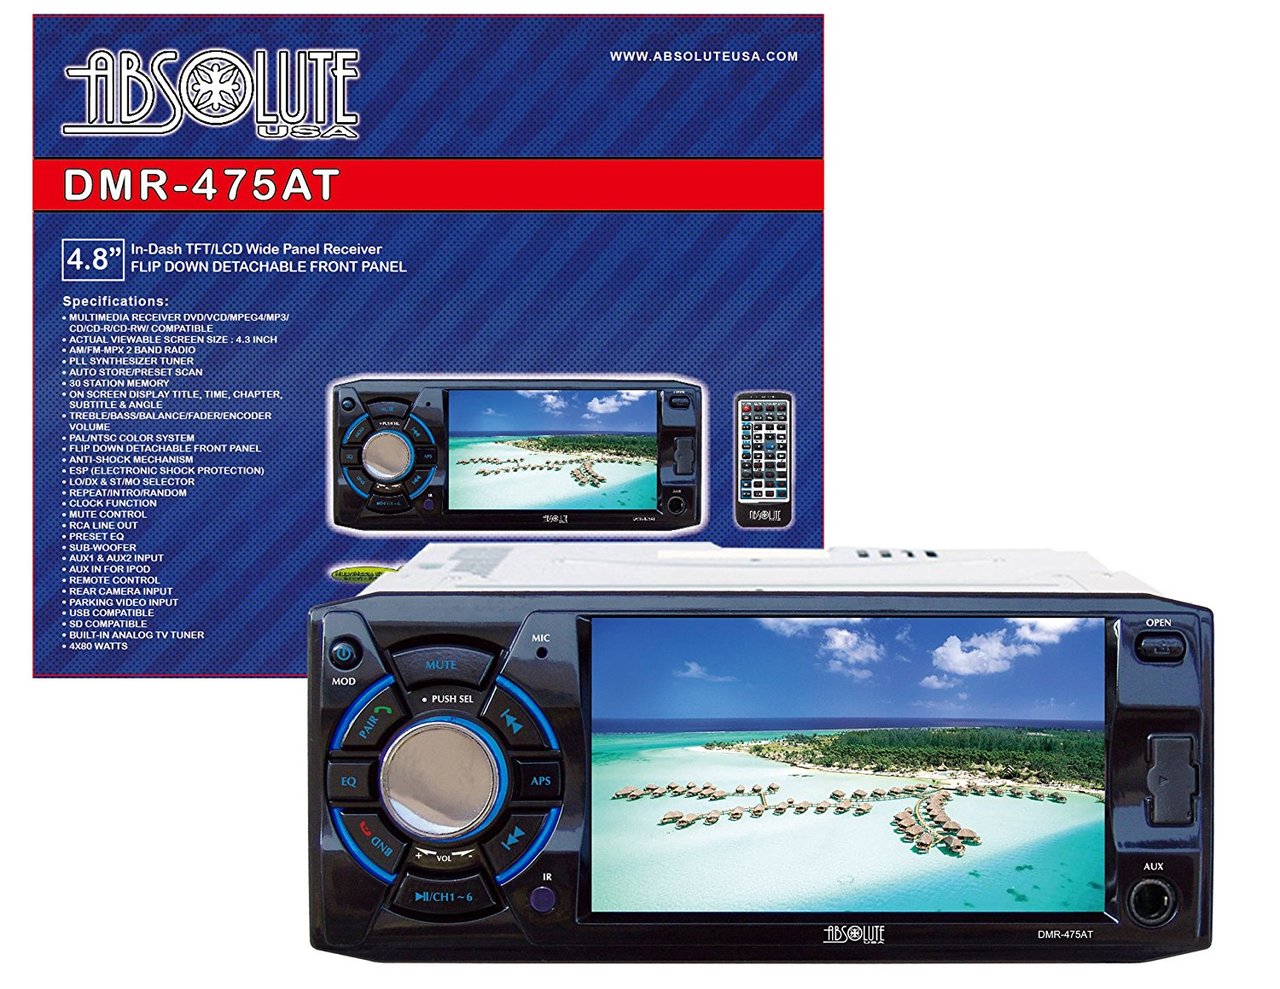 Absolute USA DMR-475 4.8-Inch DVD/MP3/CD Multimedia Player Widescreen Receiver with USB, SD Card